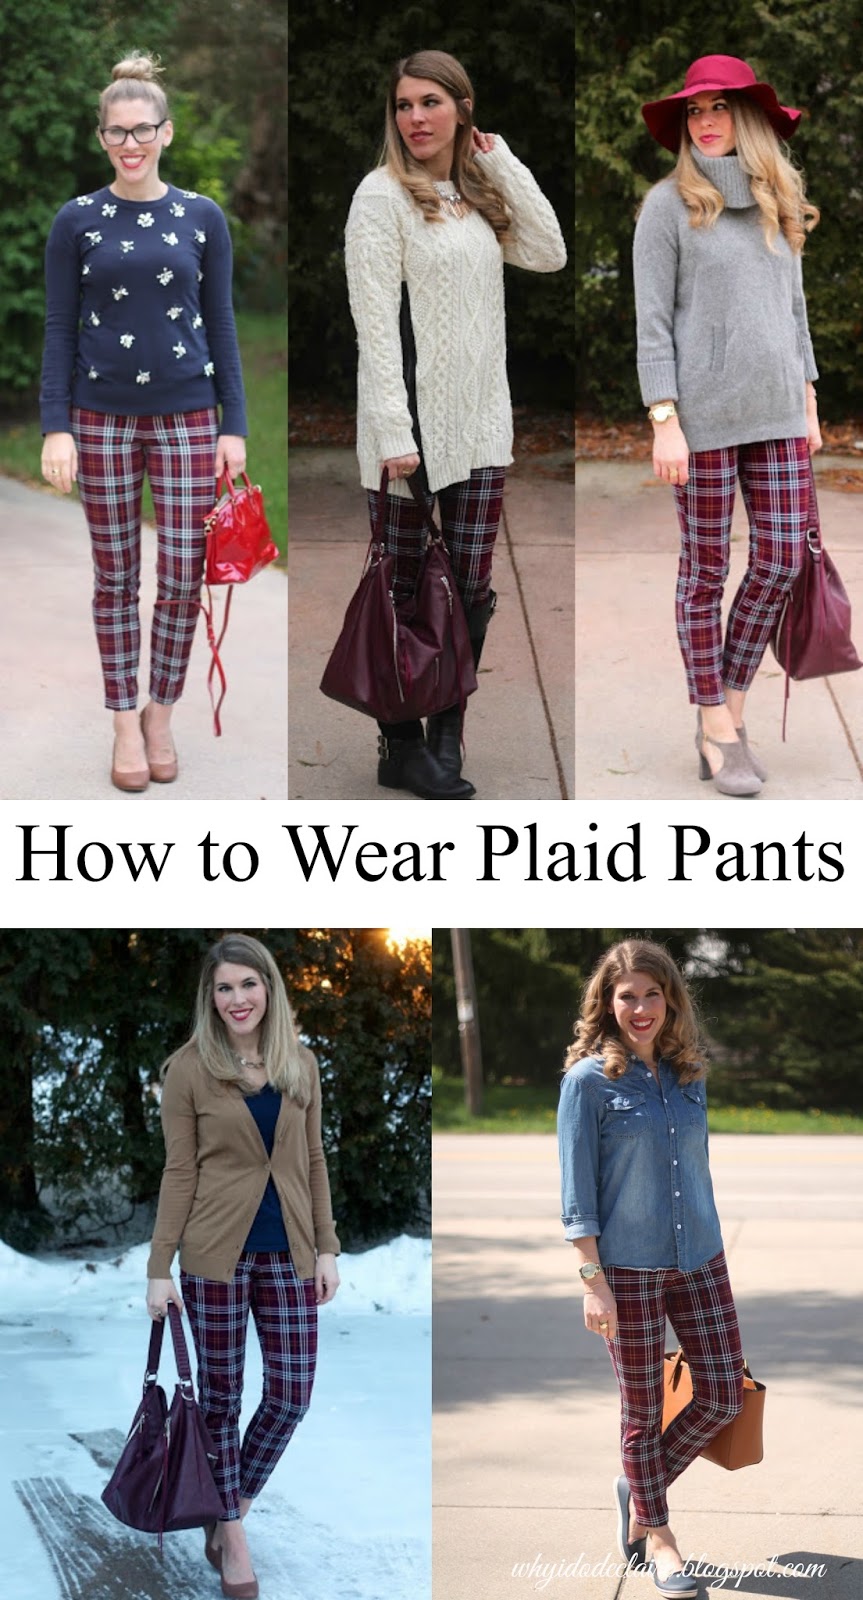 How to Wear Plaid Pants